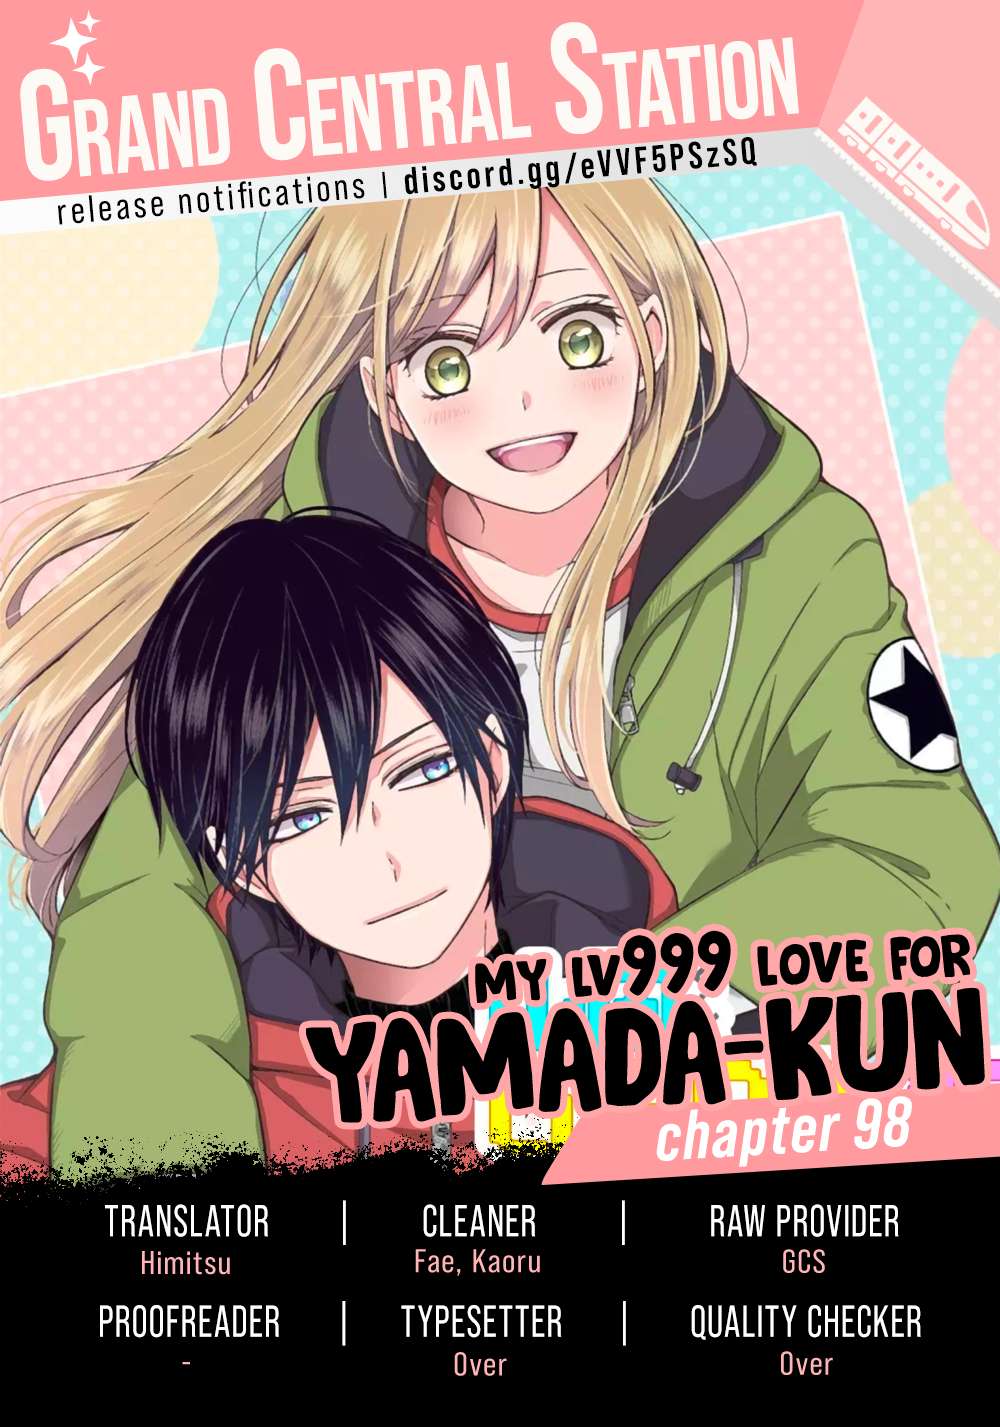 My love for yamada at lv999 chap 98｜TikTok Search